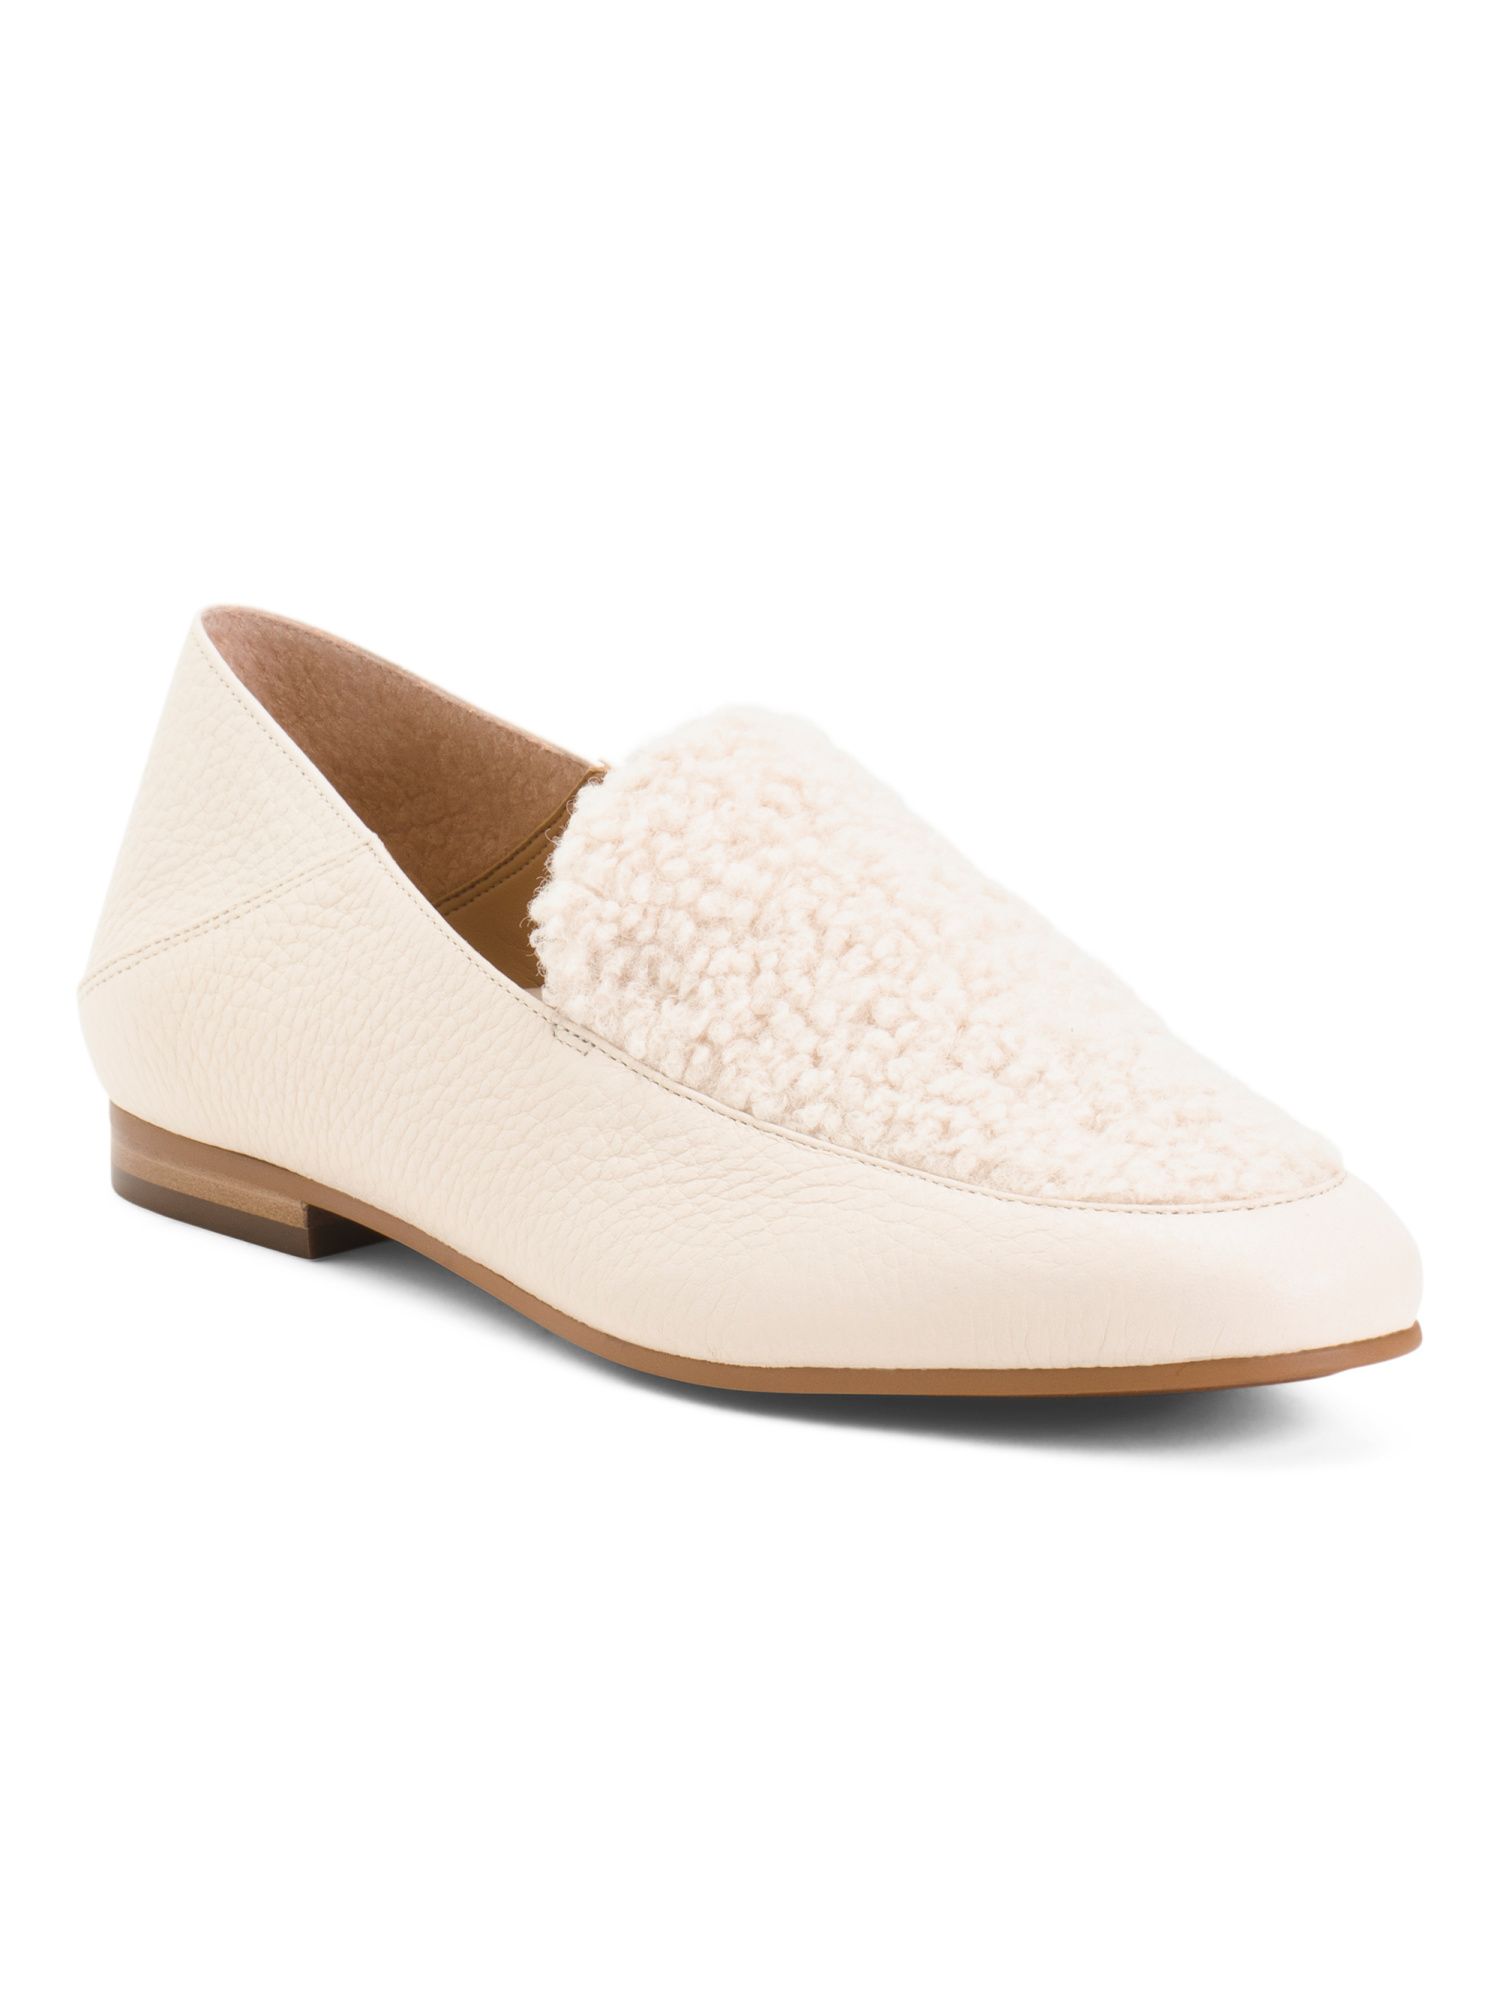 Frieda Curly Faux Shearling Leather Loafers | TJ Maxx